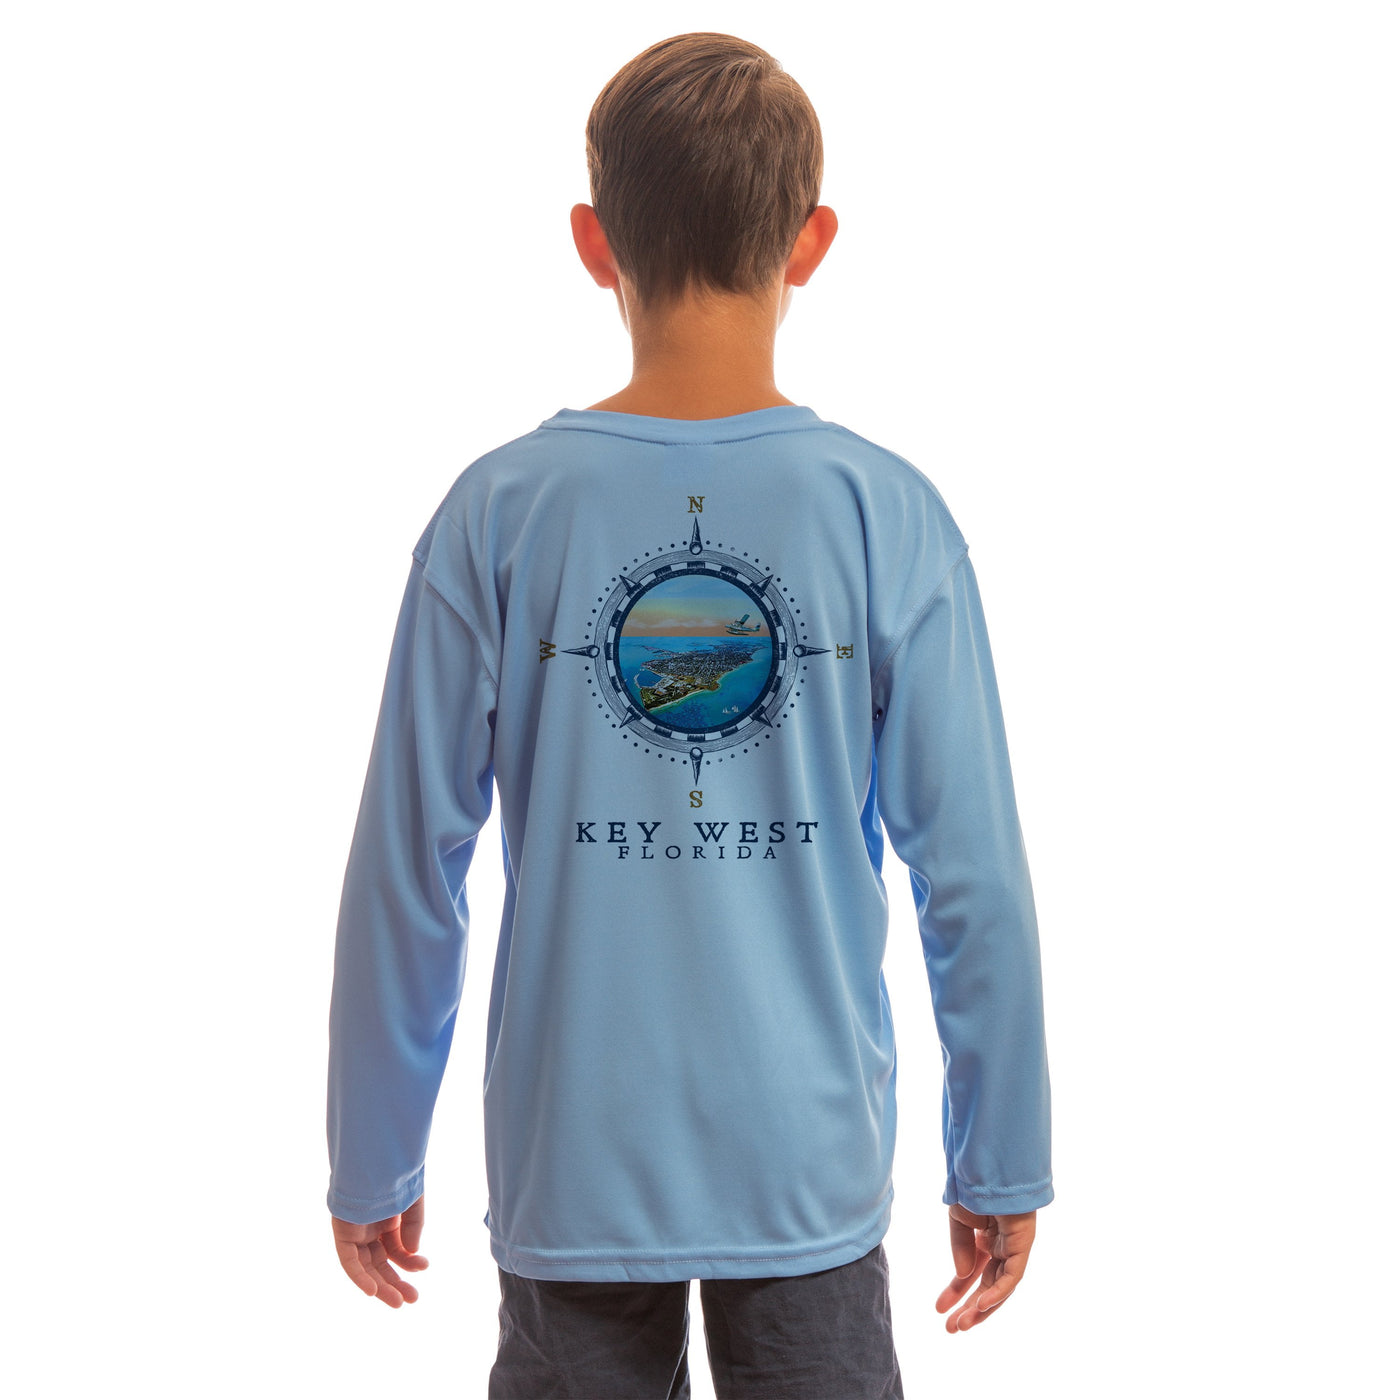 Compass Vintage Key West Youth UPF 50+ UV/Sun Protection Long Sleeve T-Shirt